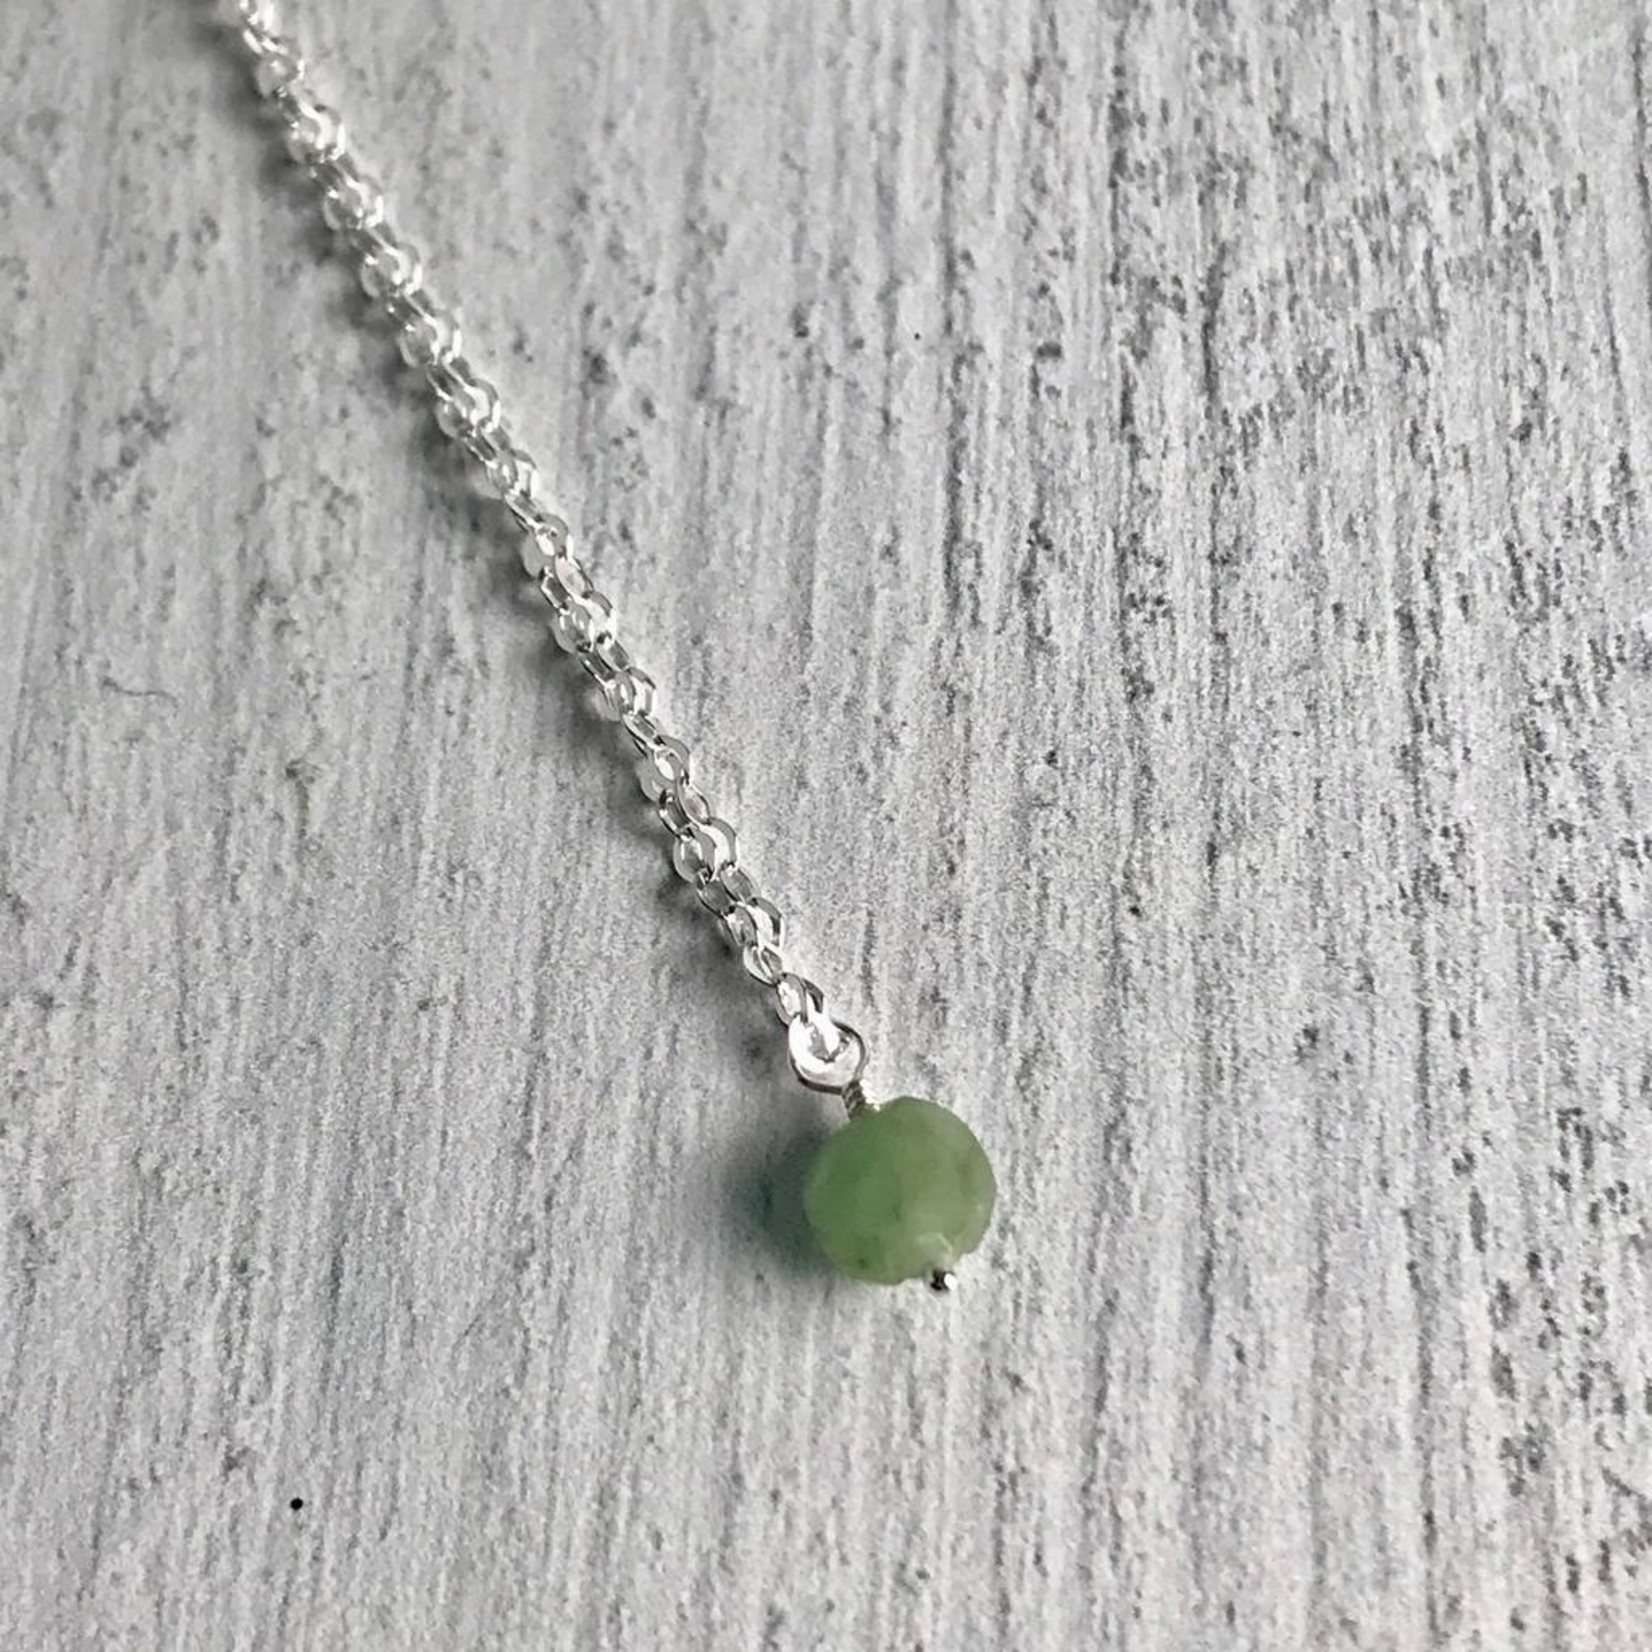 Handmade Silver Necklace with Emerald Drop